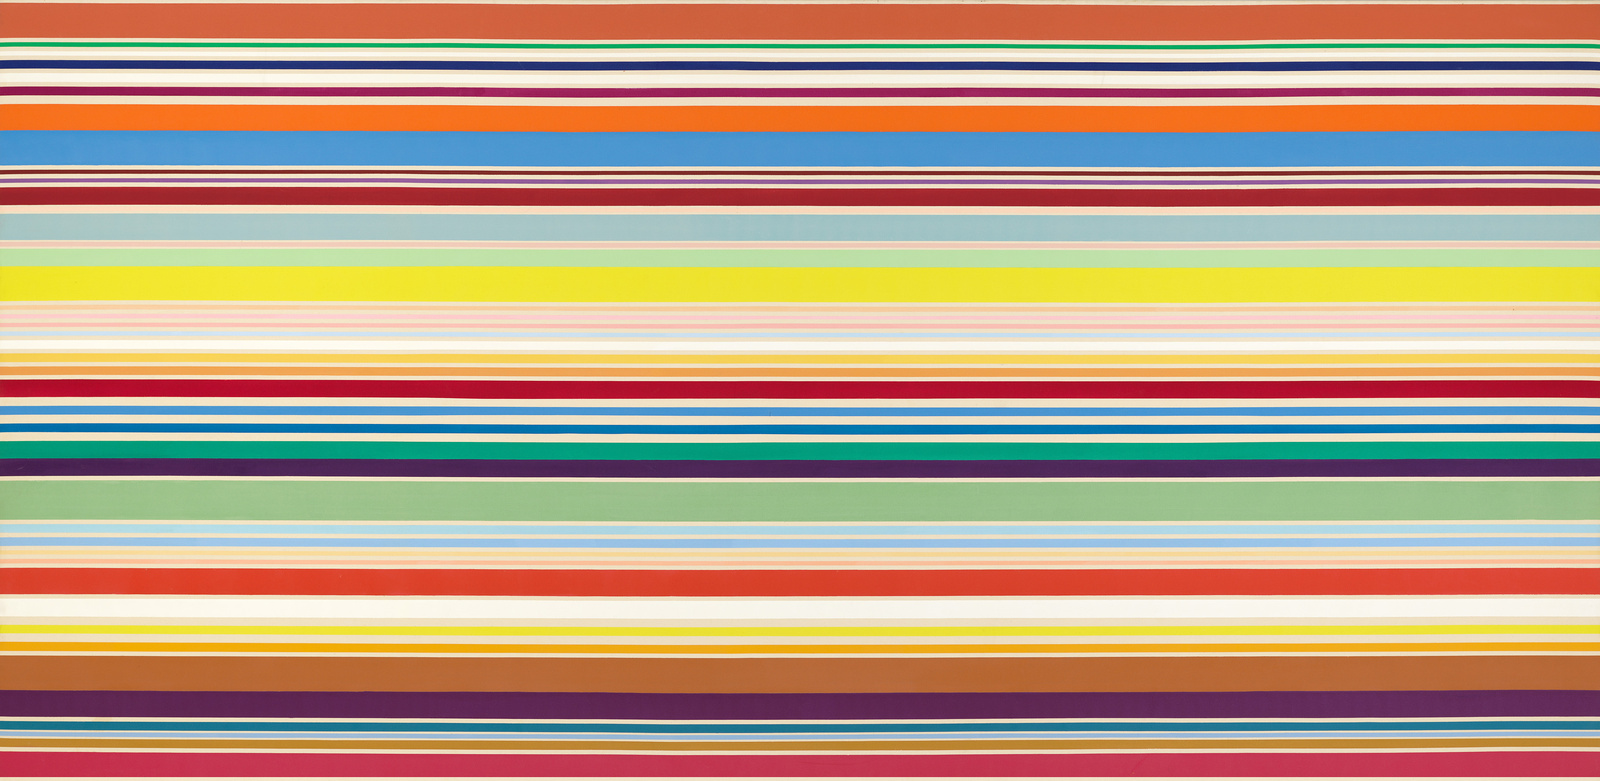 An abstract landscape of sharp horizontal lines of varied weights in shades of orange, yellow, red, green, blue, and white.